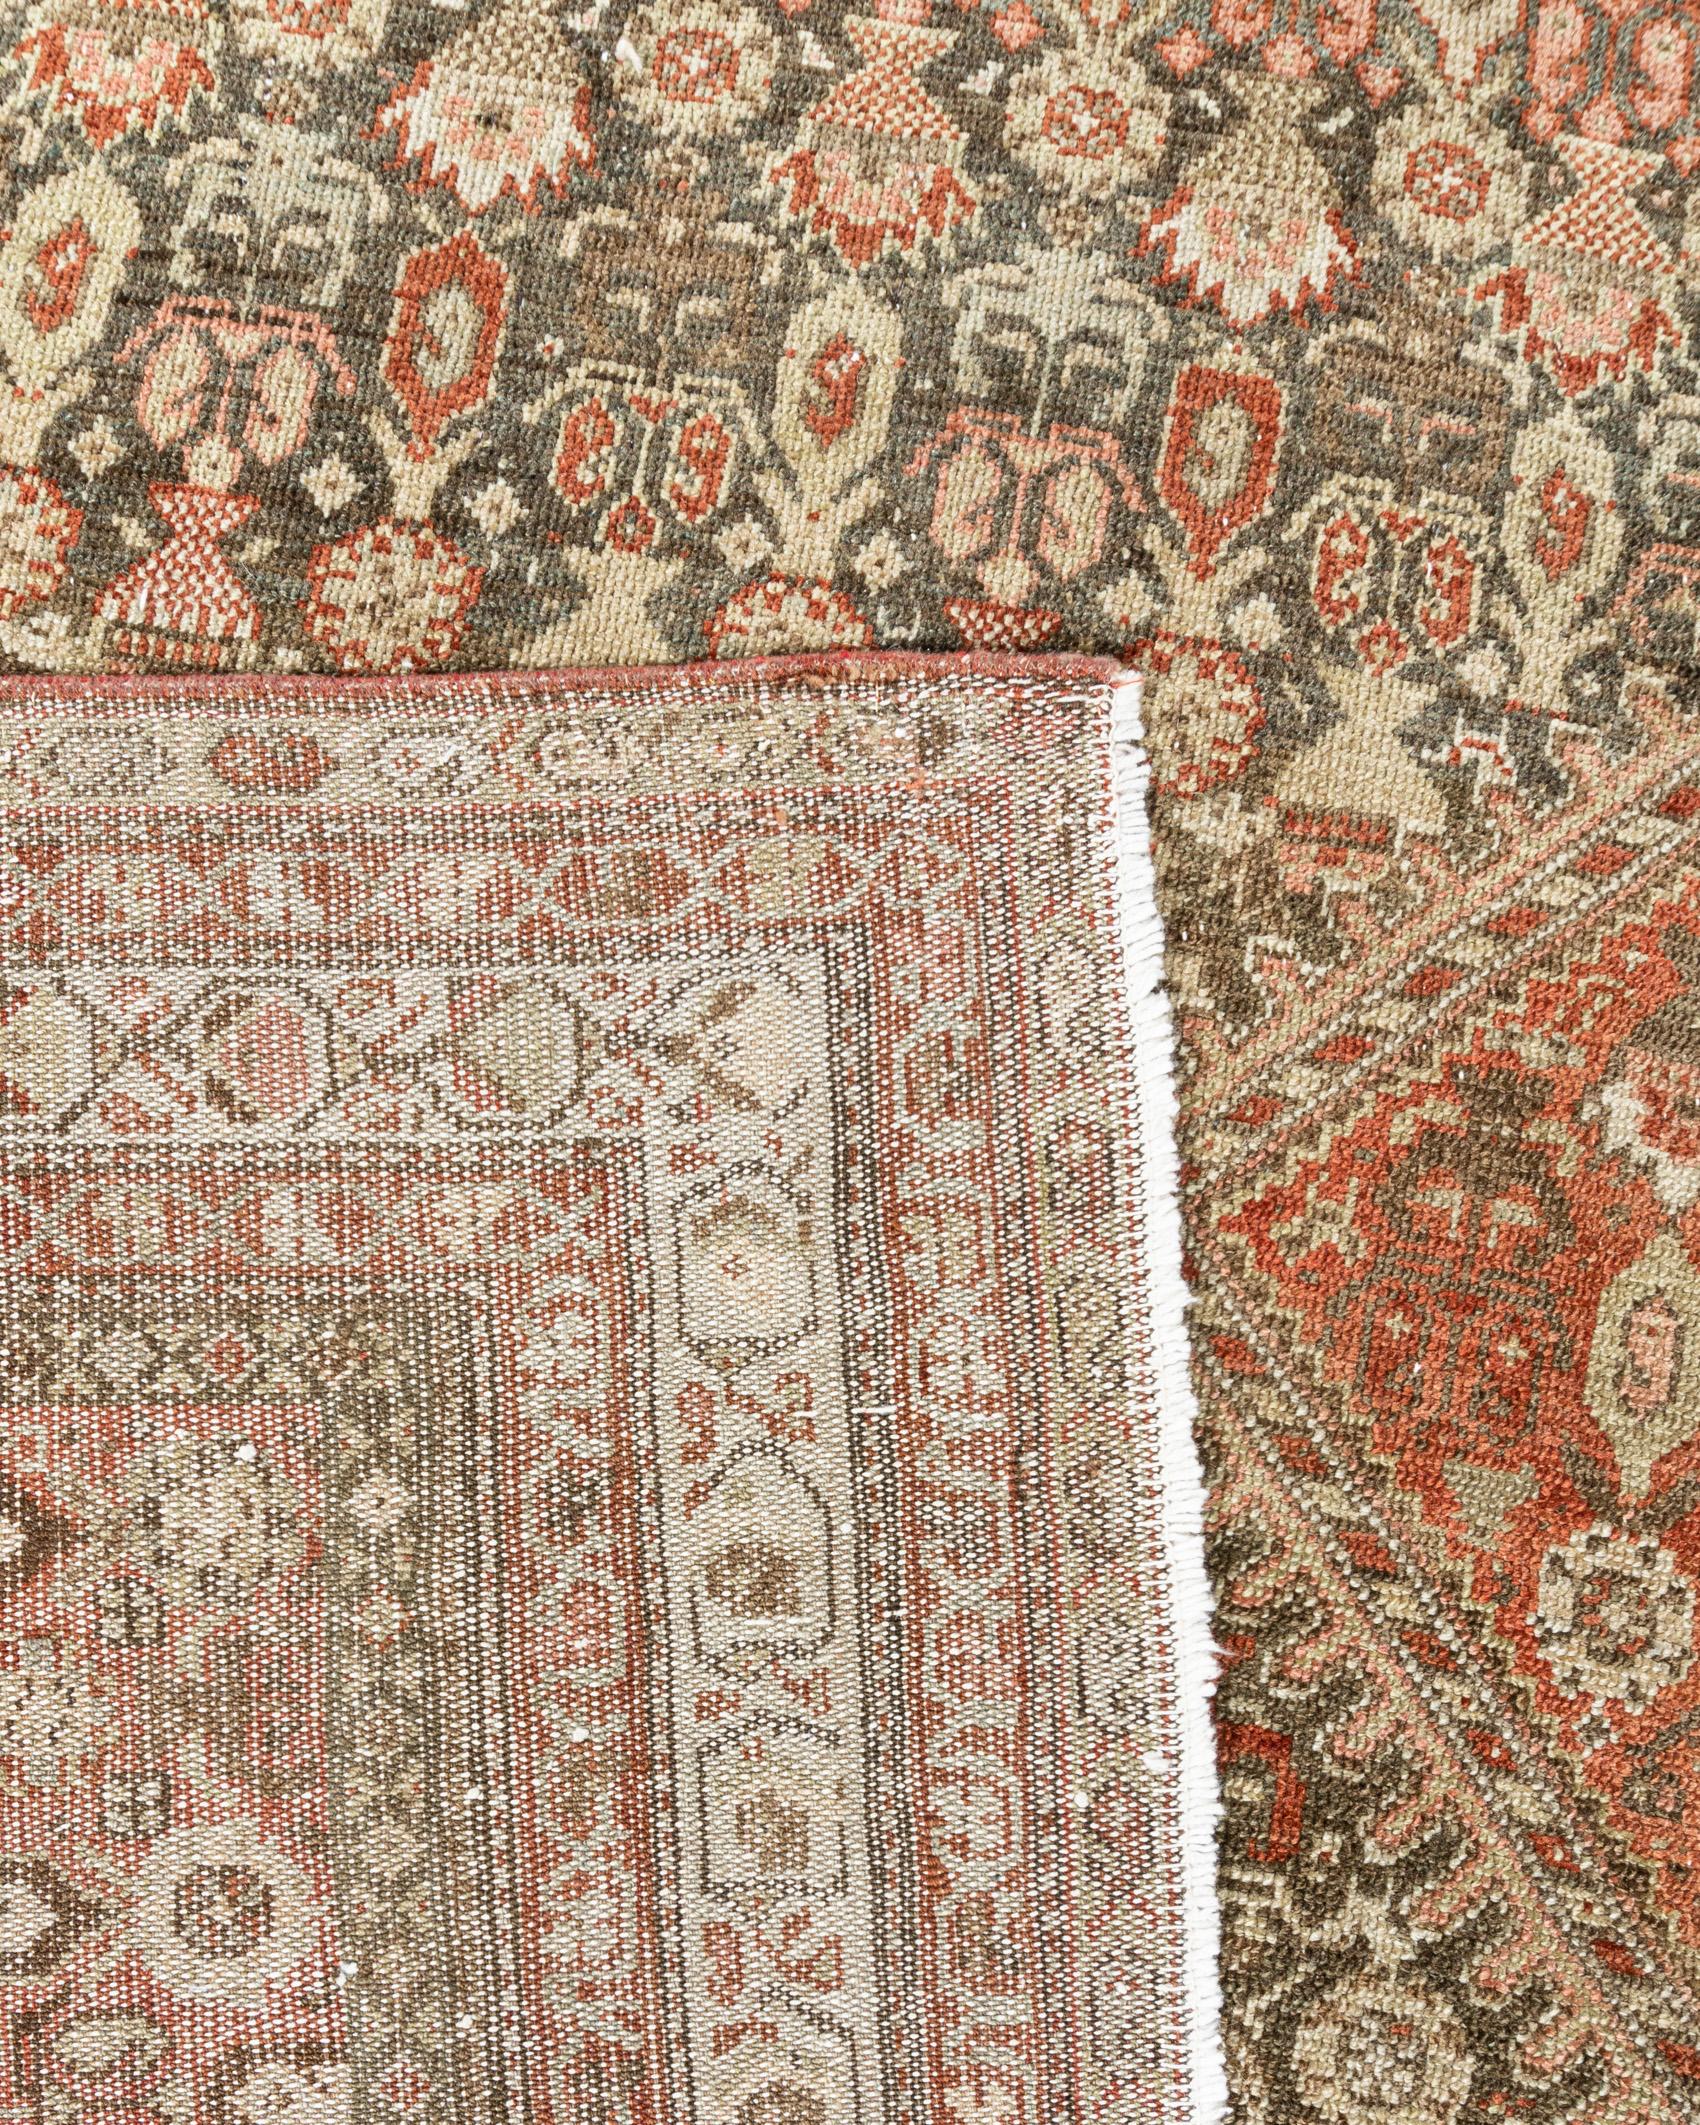 Antique Persian Malayer Runner 5'3 X 12'2 In Good Condition For Sale In New York, NY